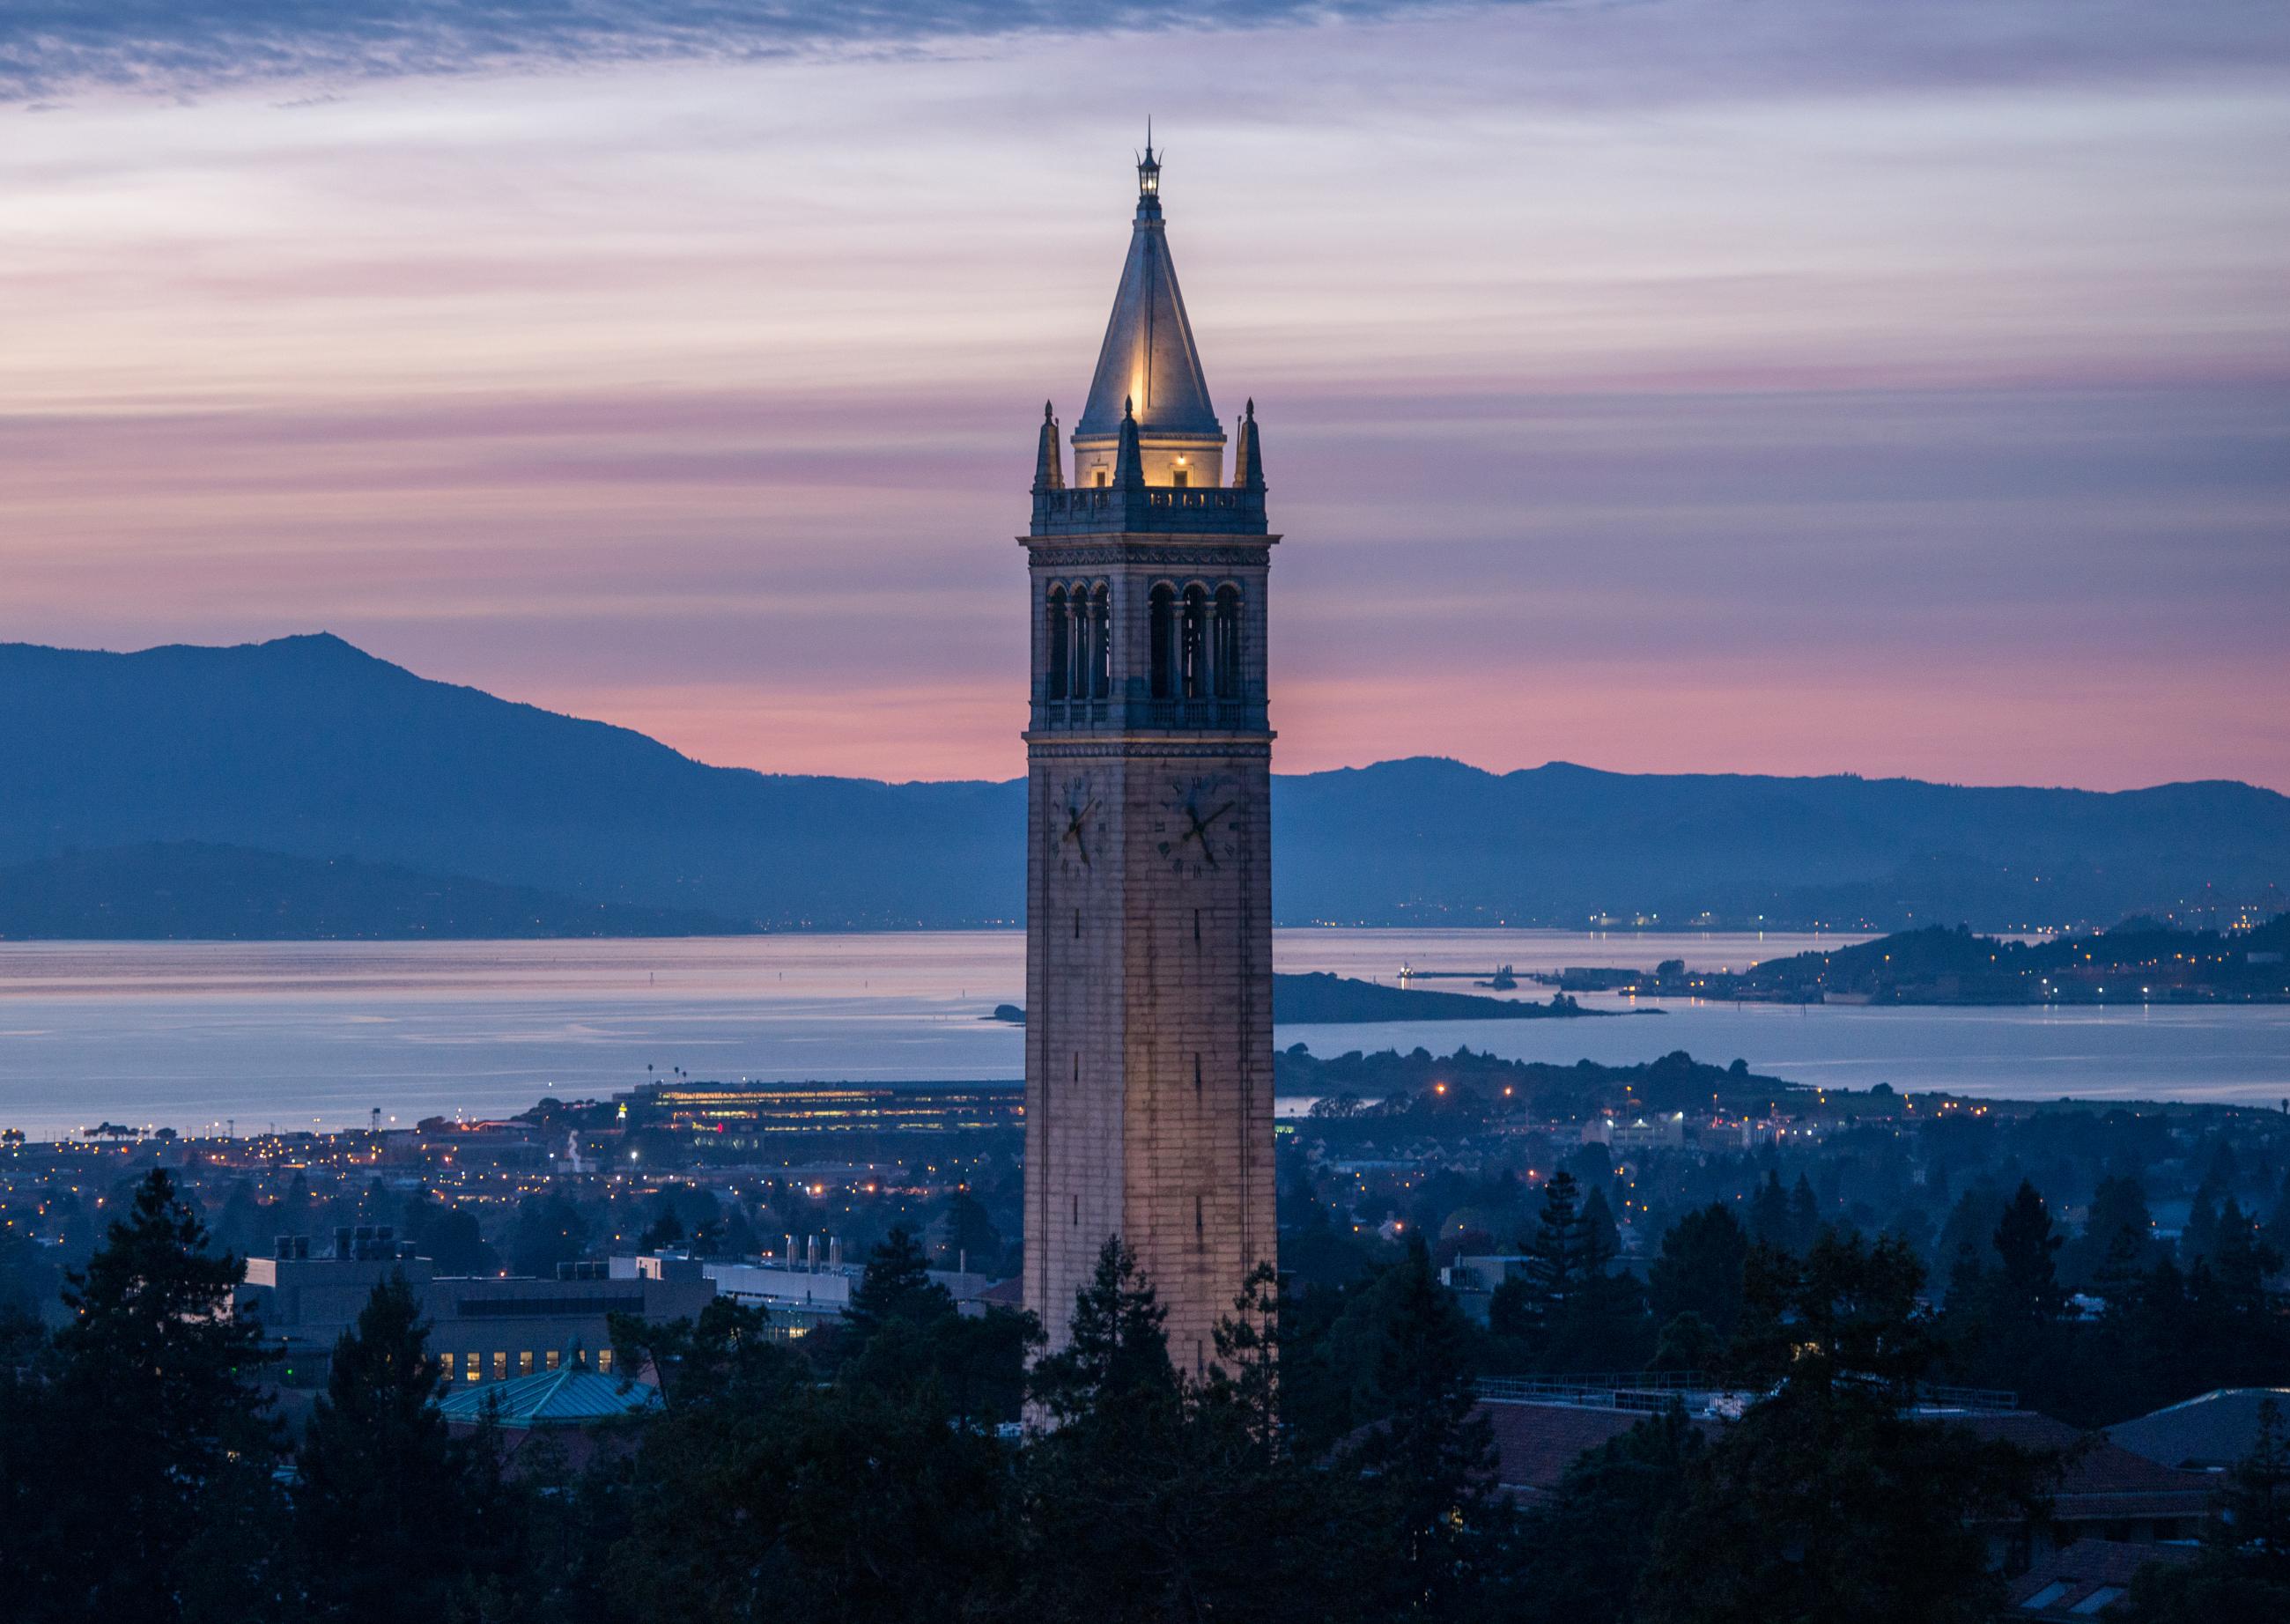 Sather Tower at sunset with a view of the bay. (Photo /Matt Beardsley)